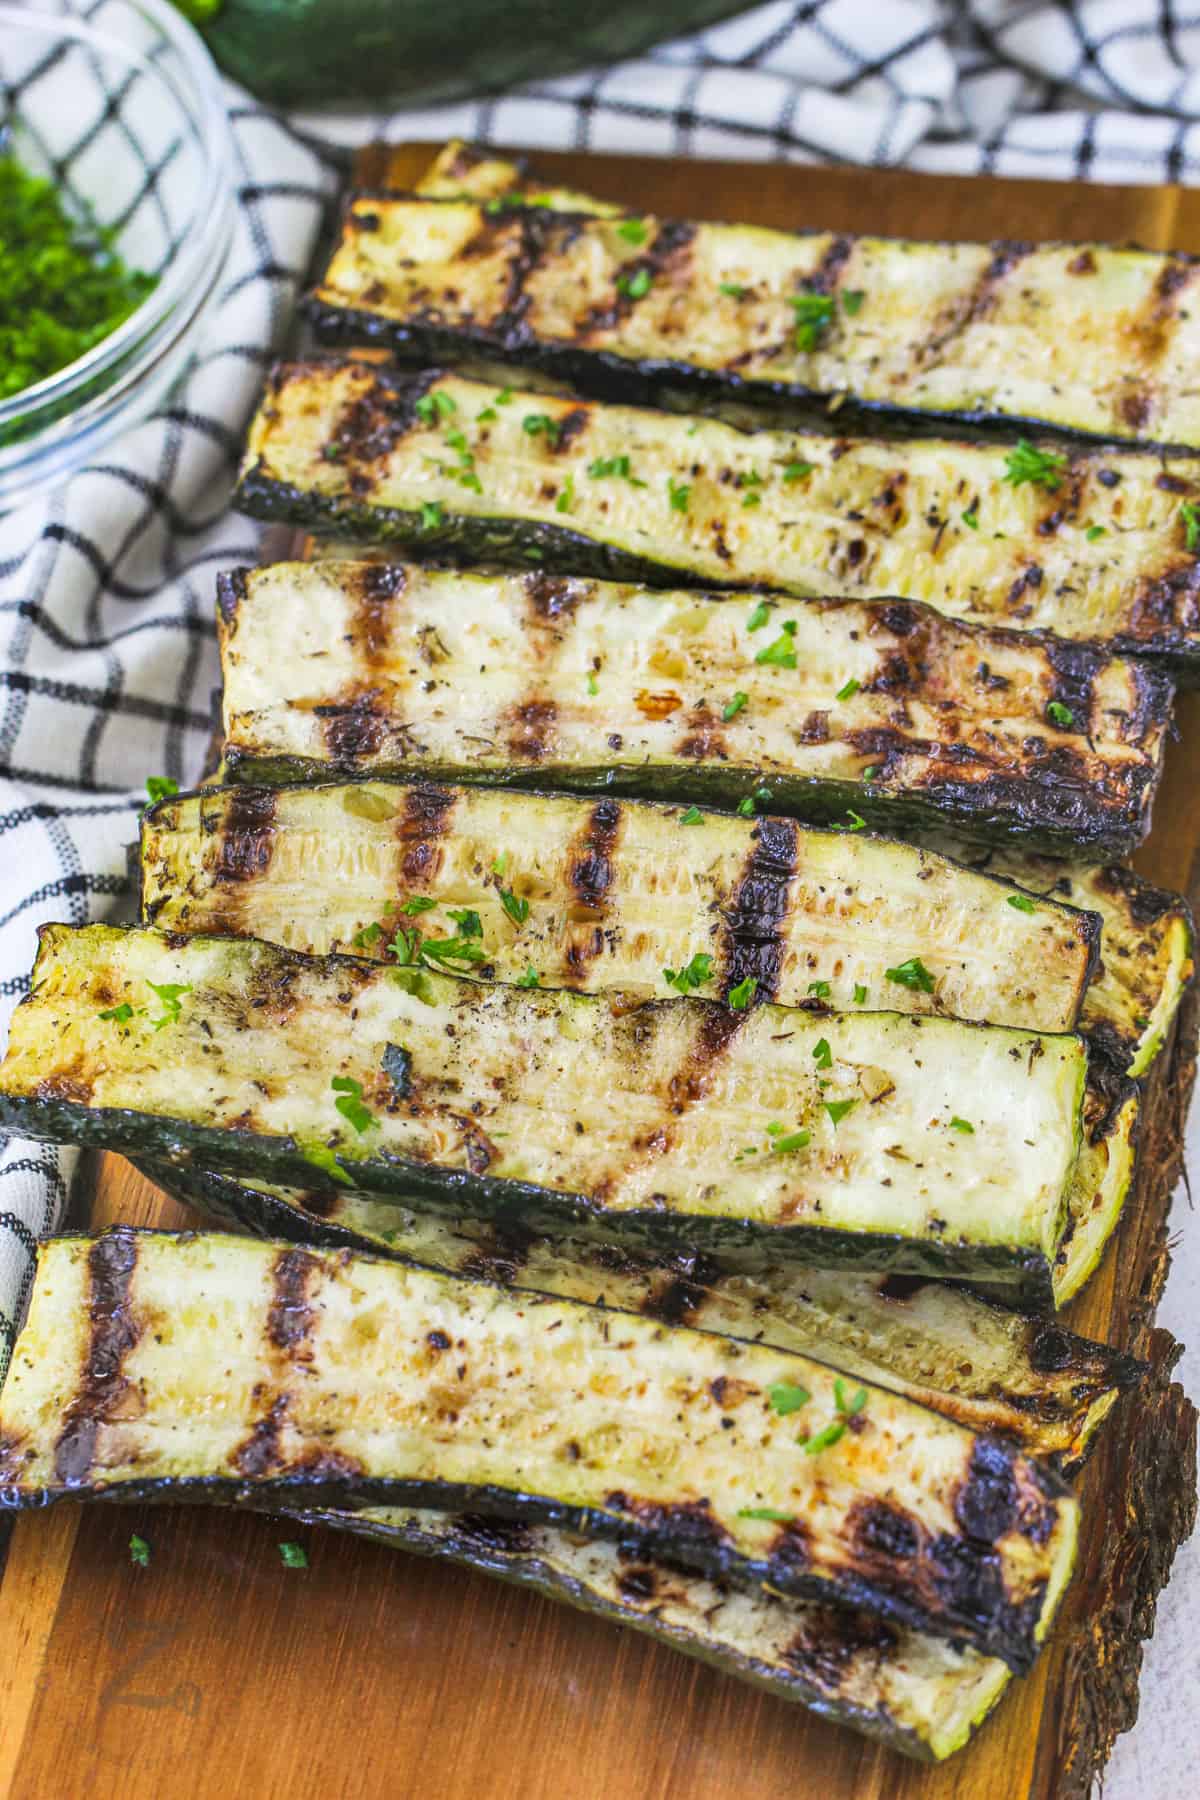 Grilled Zucchini on a wooden board